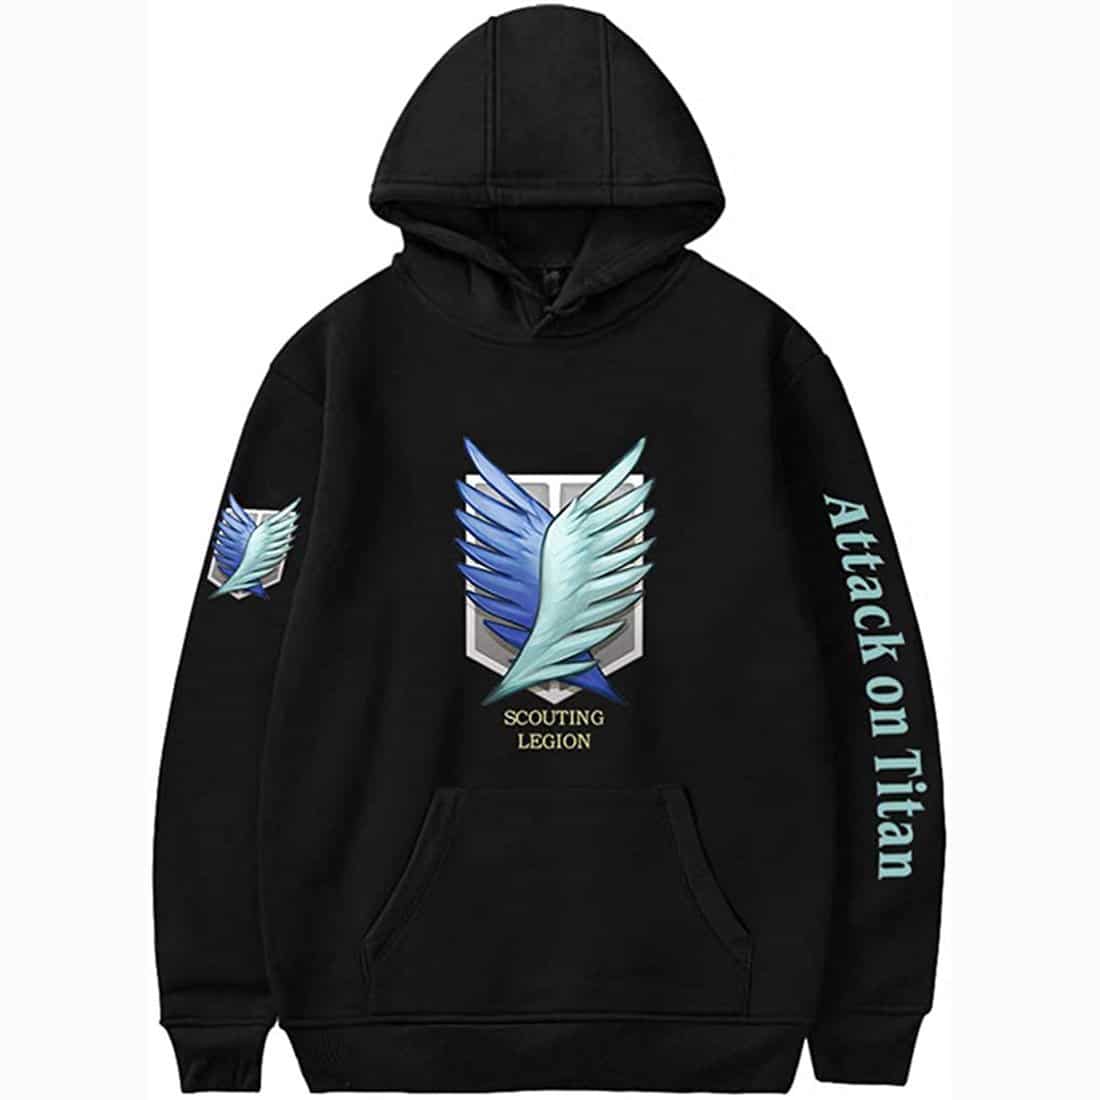 Attack on Titan Hoodies Fashion Hooded Pullover Sweatshirts for Unisex